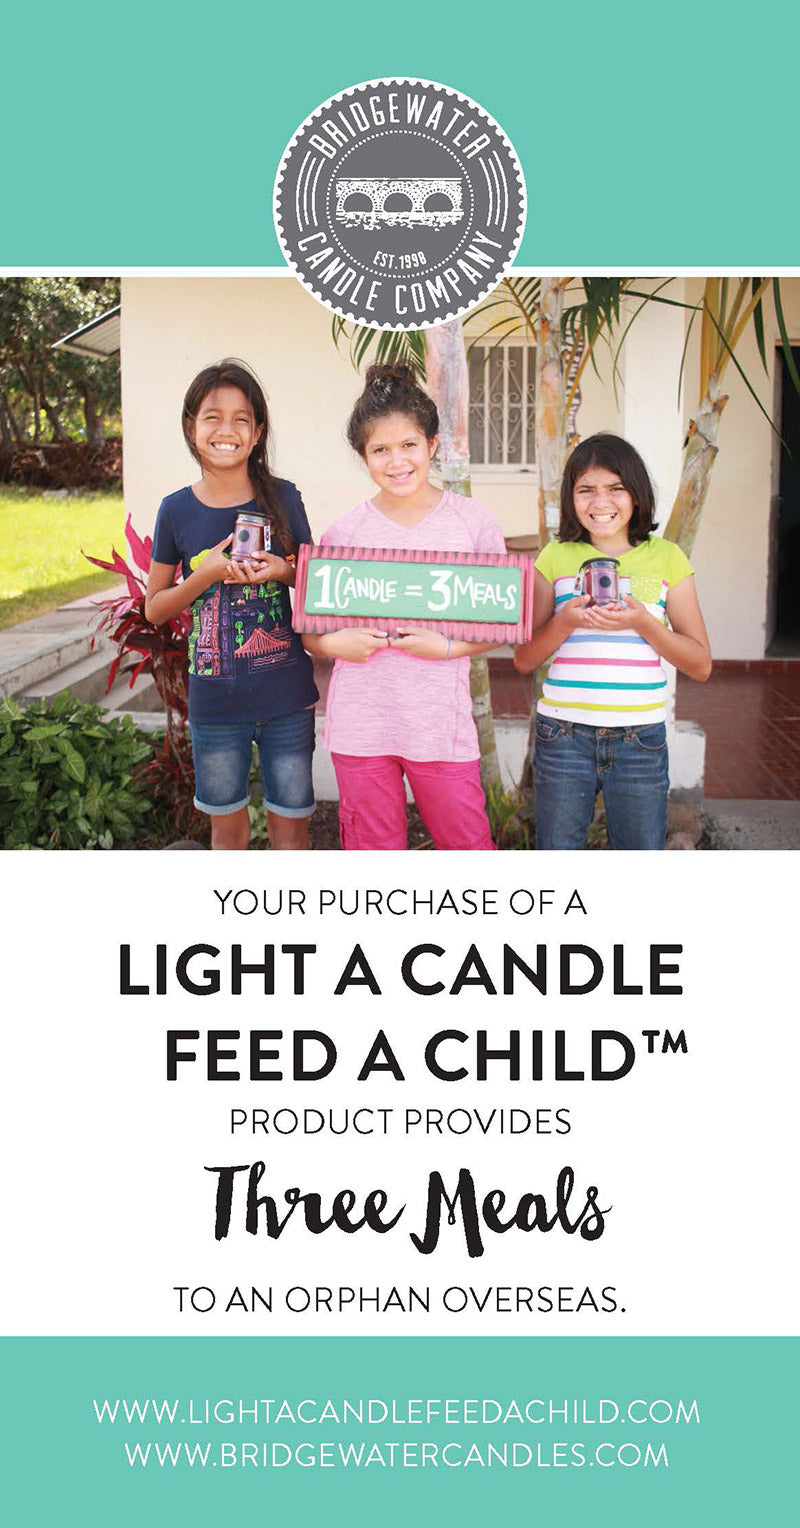 Light a Candle Feed a Child Poster